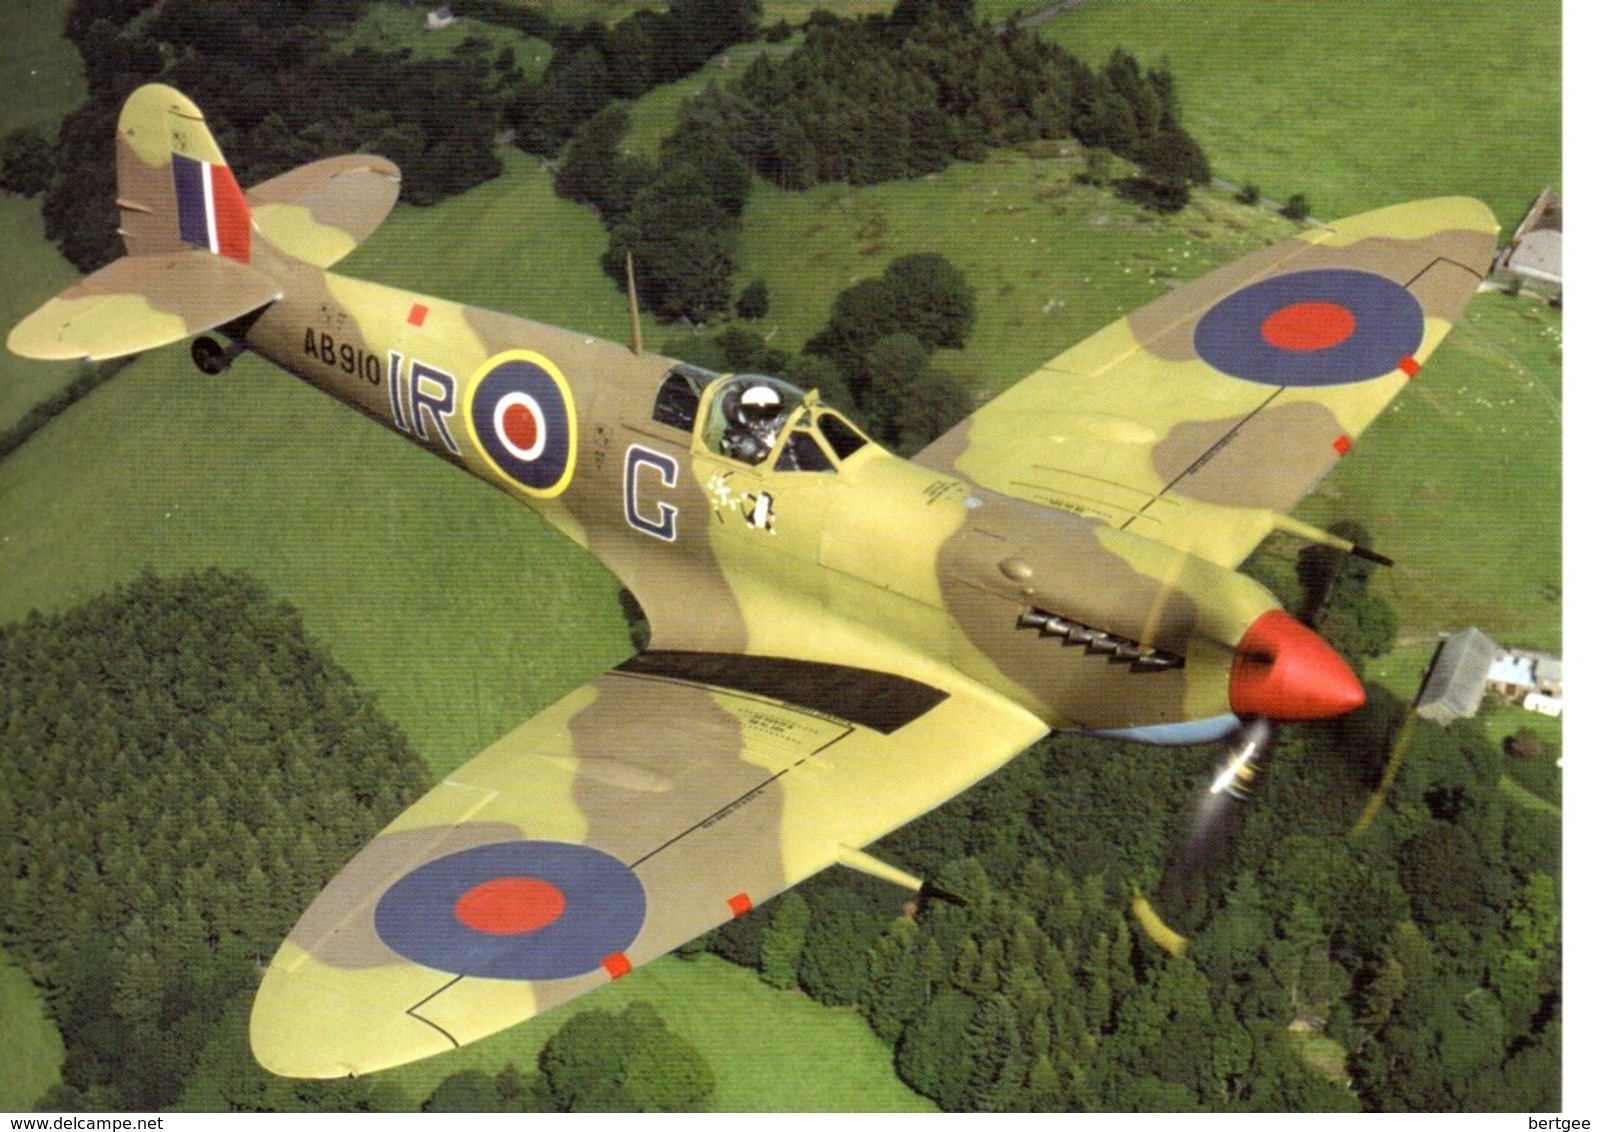 UNUSED POSTCARD (AIRCRAFT OF THE BATTLE OF BRITAIN MEMORIAL FLIGHT) - No 7. SPITFIRE VB AB910 - 1946-....: Moderne